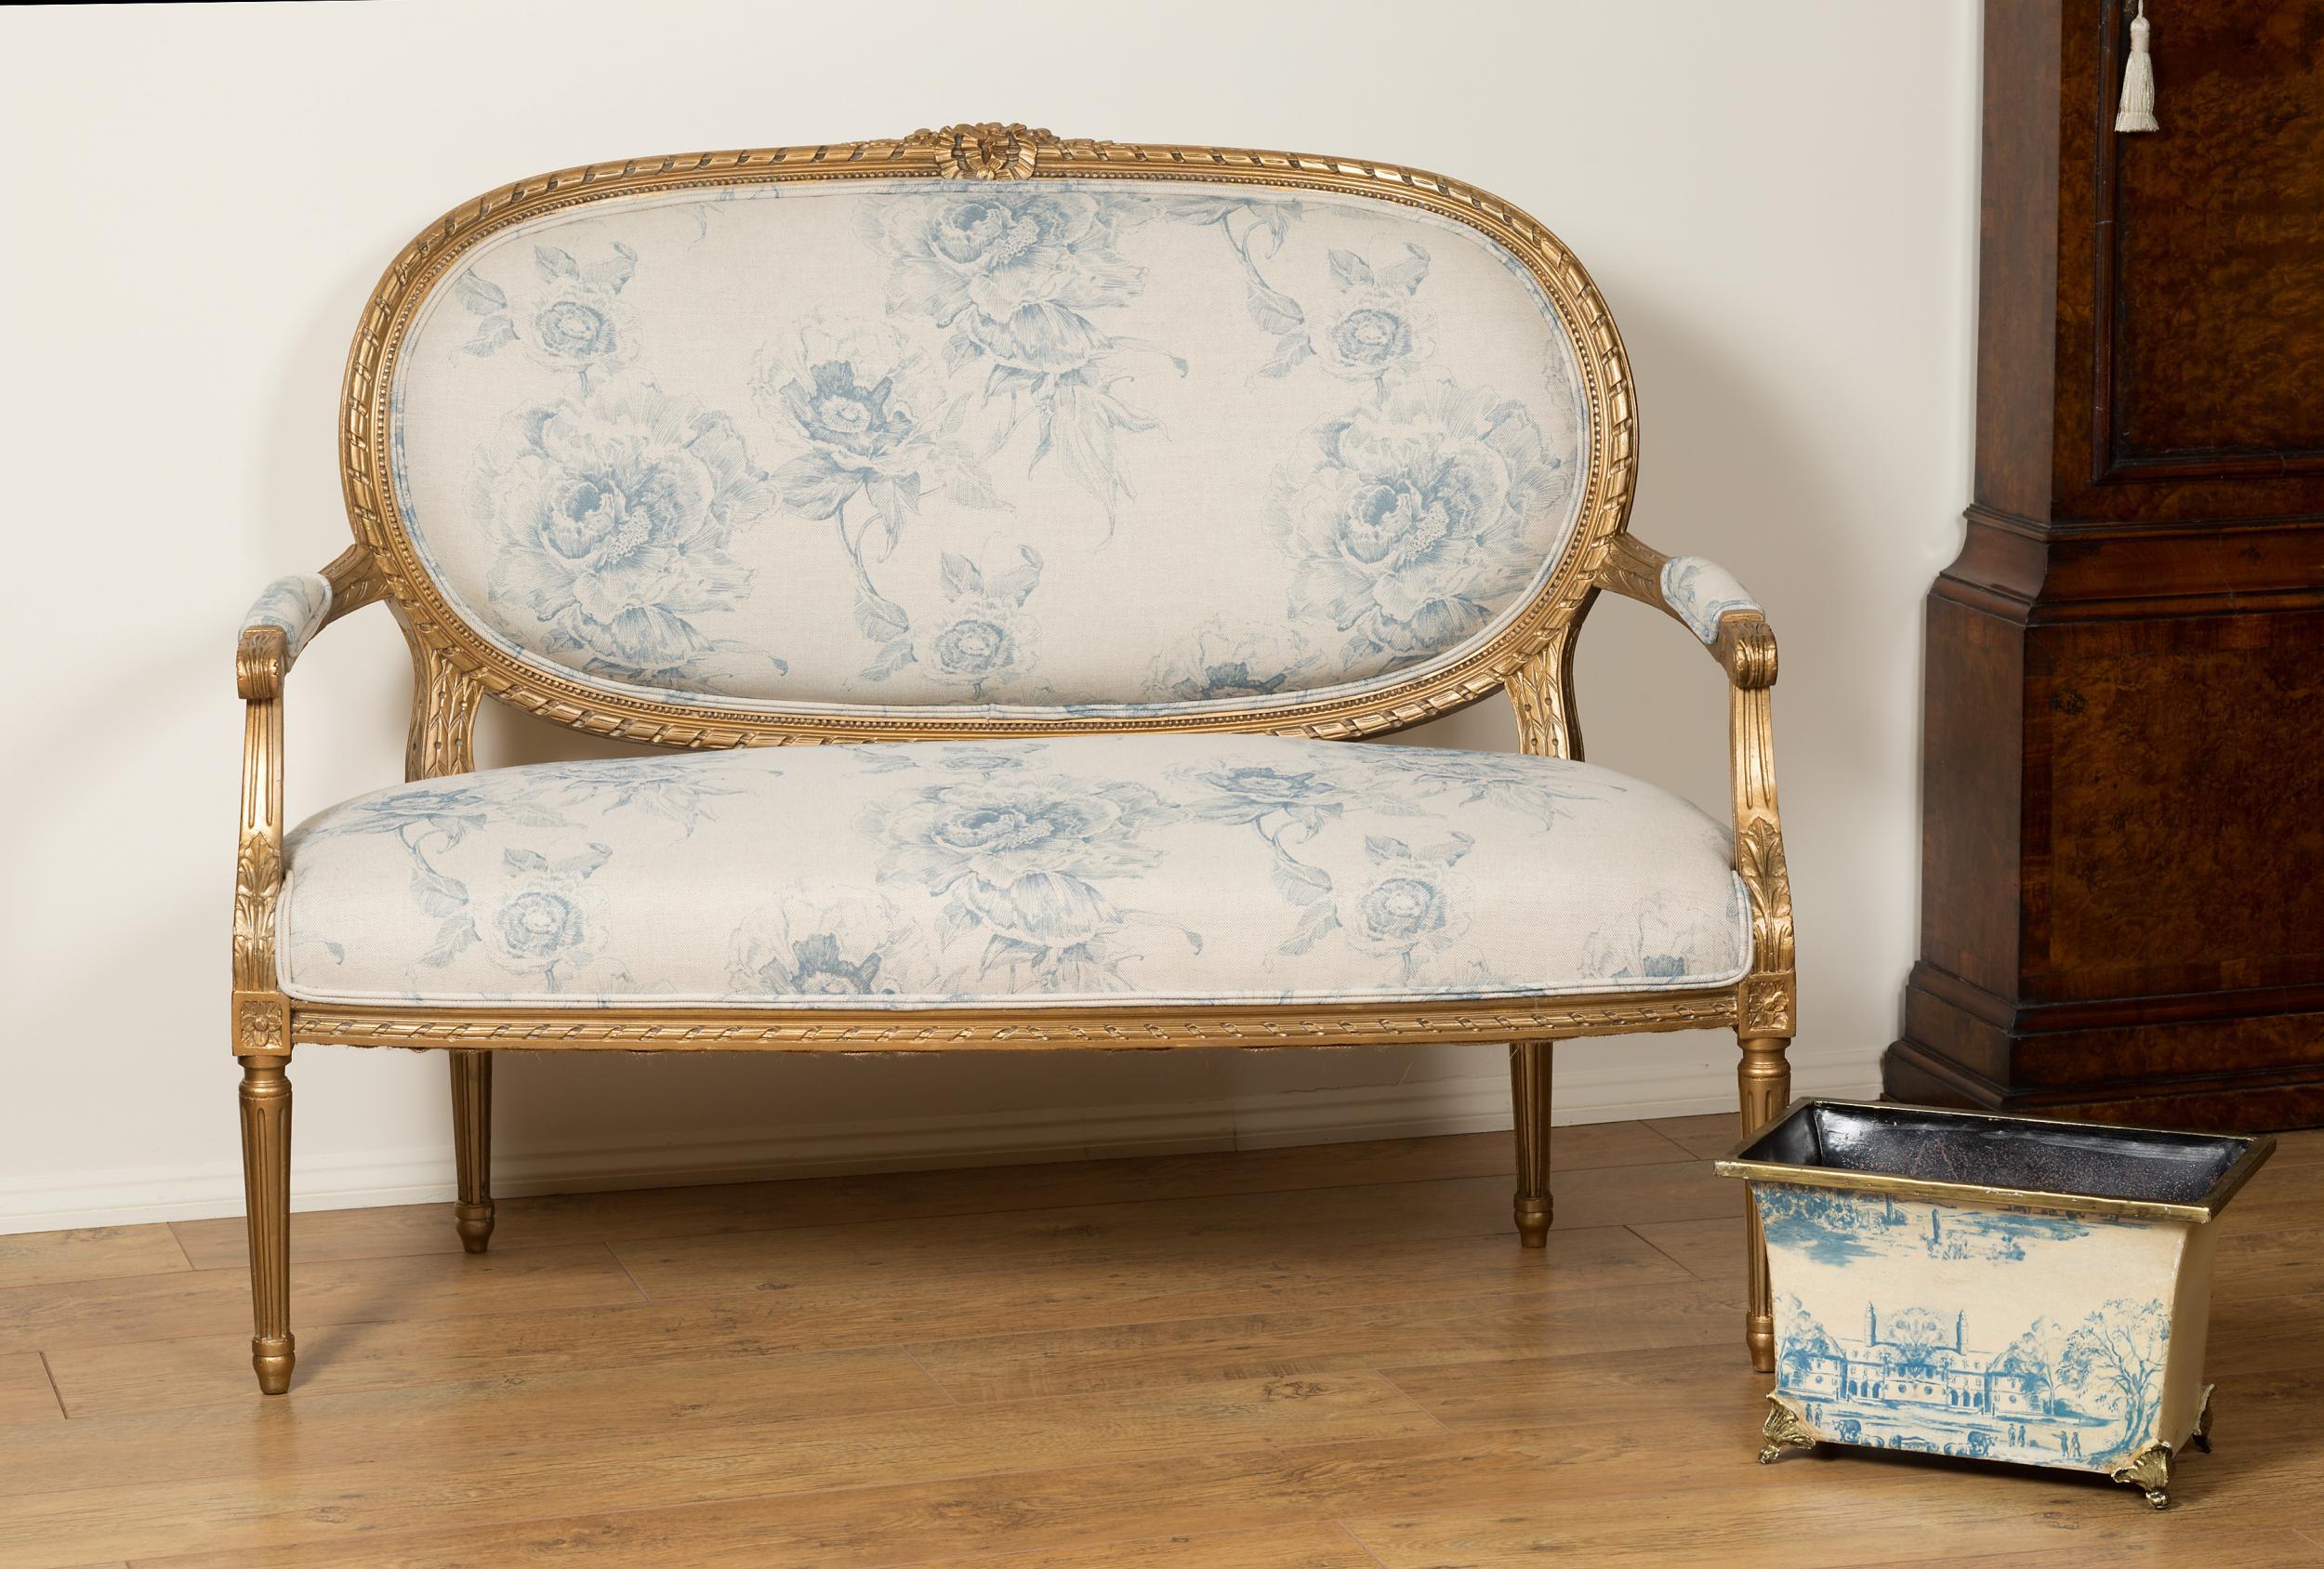 French gilt wood two seat settee standing on tapered fluted legs with beautifully carved decoration, c.1870.